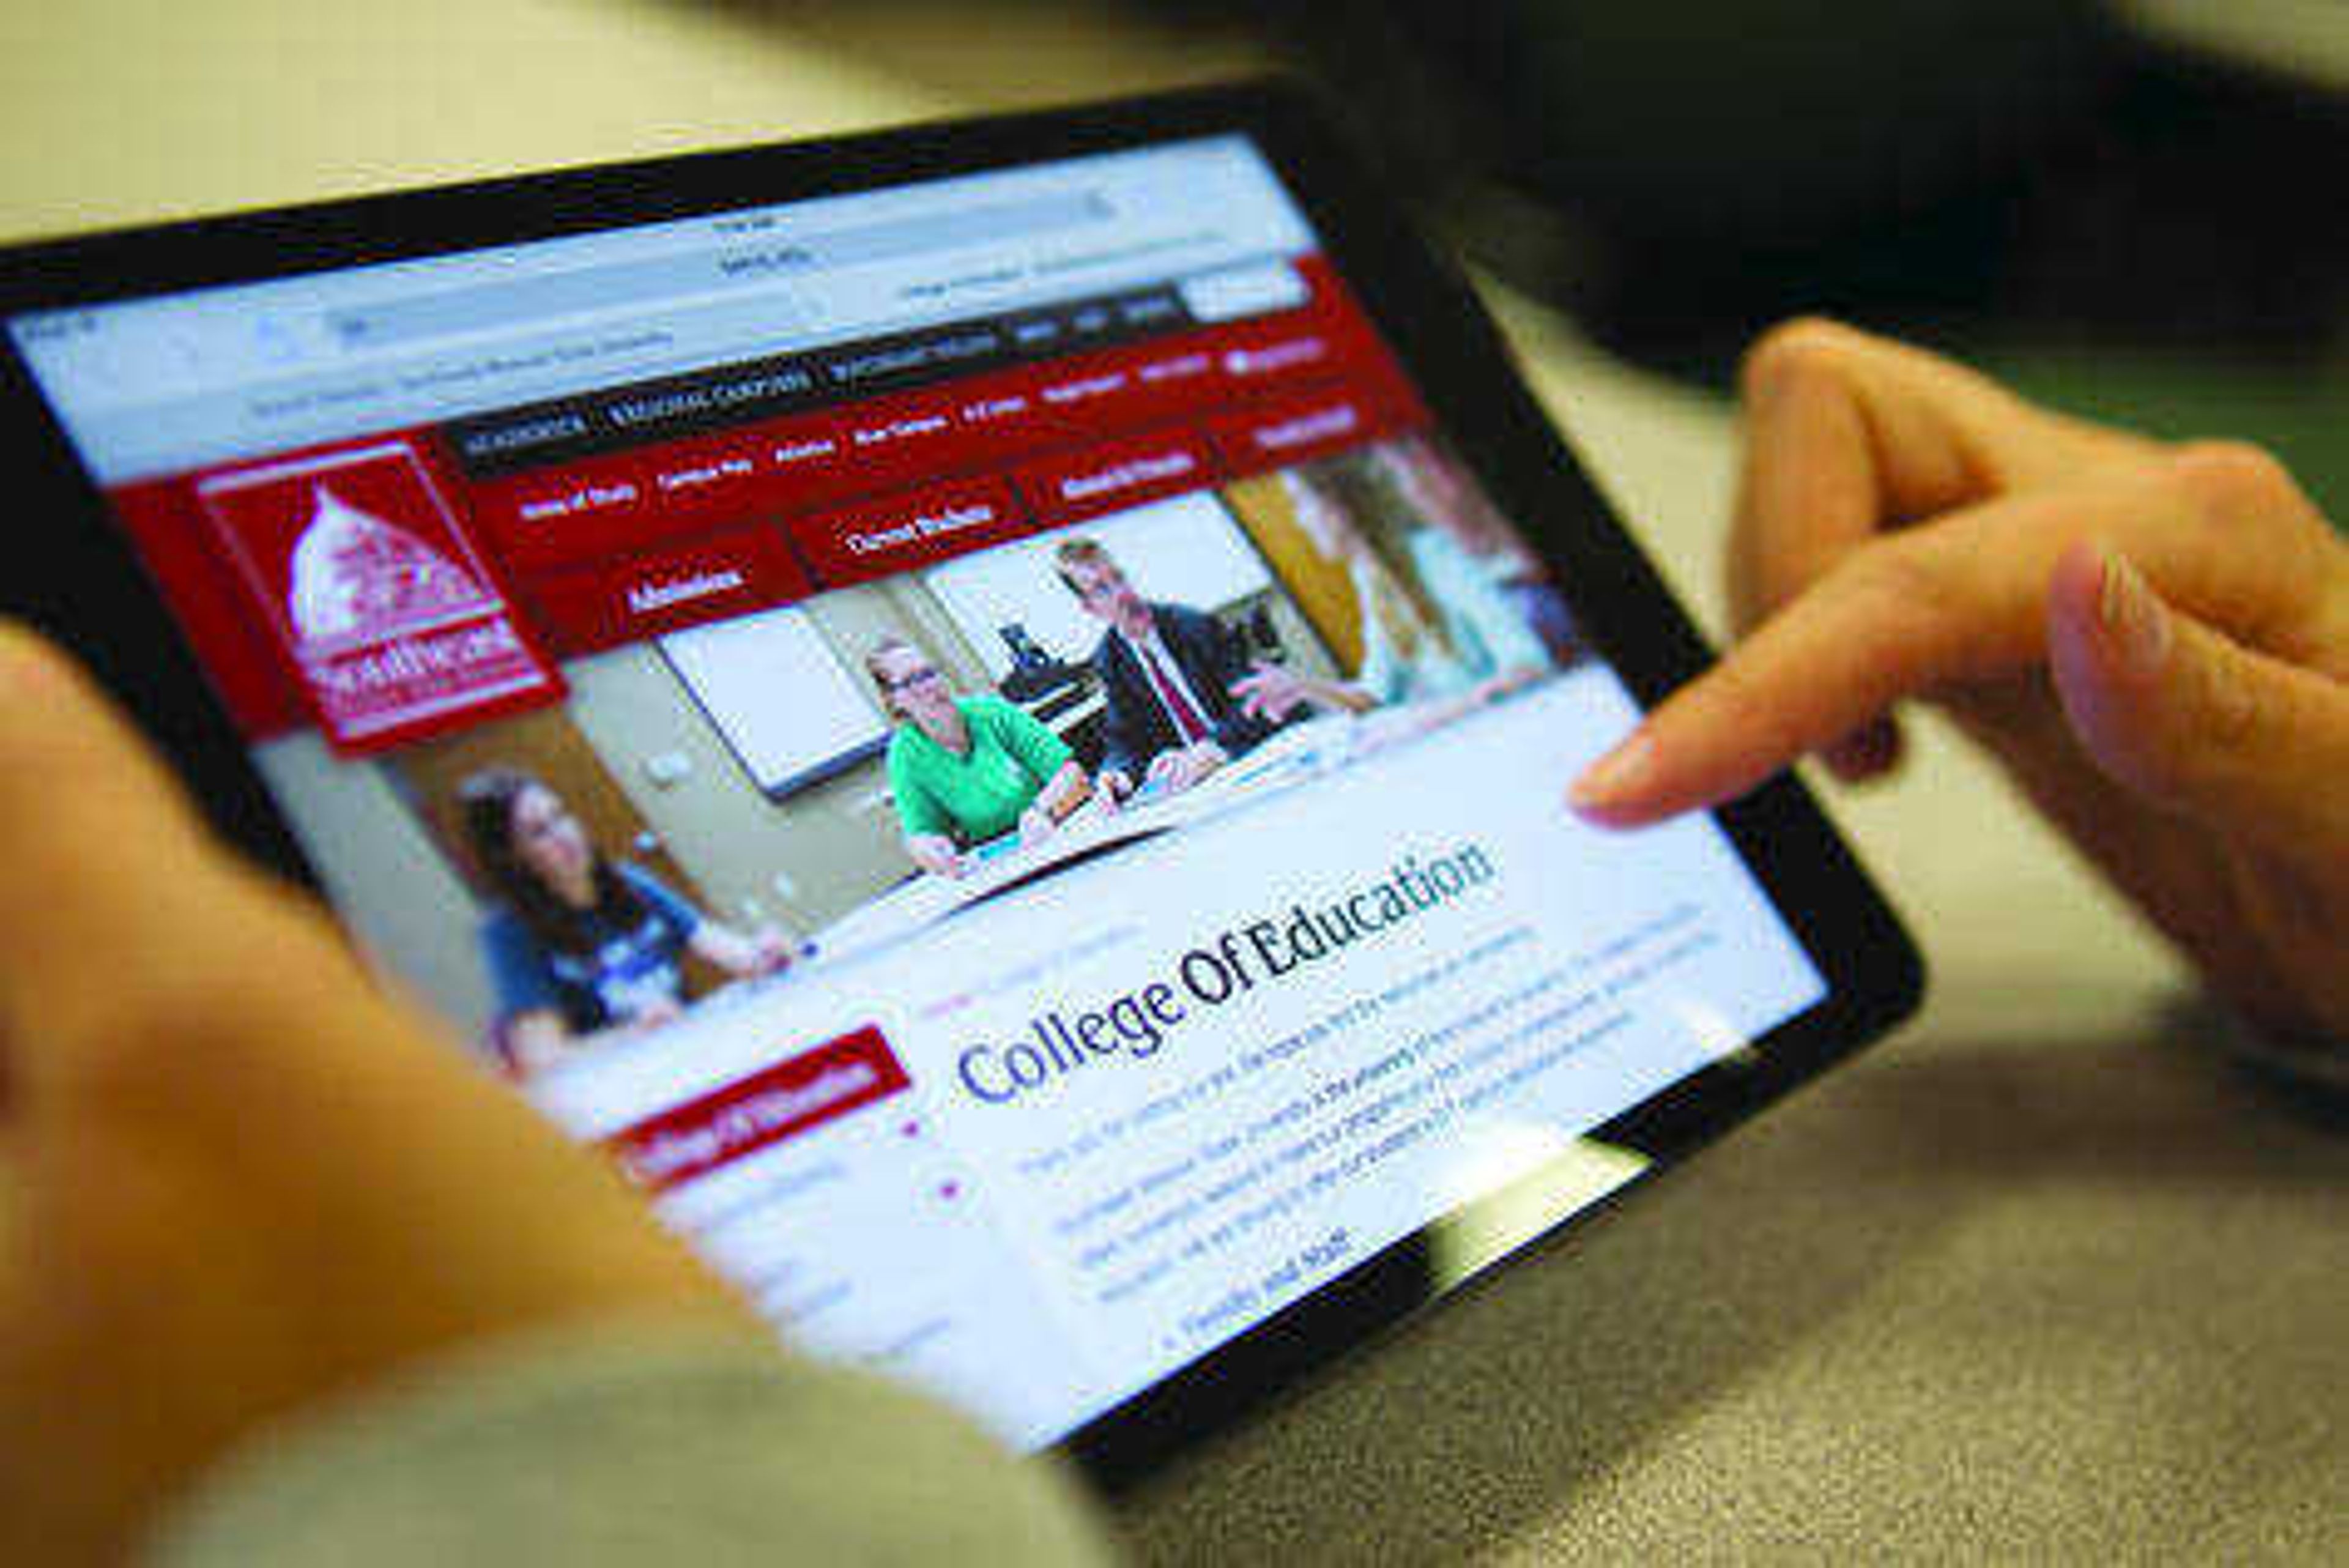 Students with any major can now lease a iPad from the university at the rate of $200 per semester. file photo